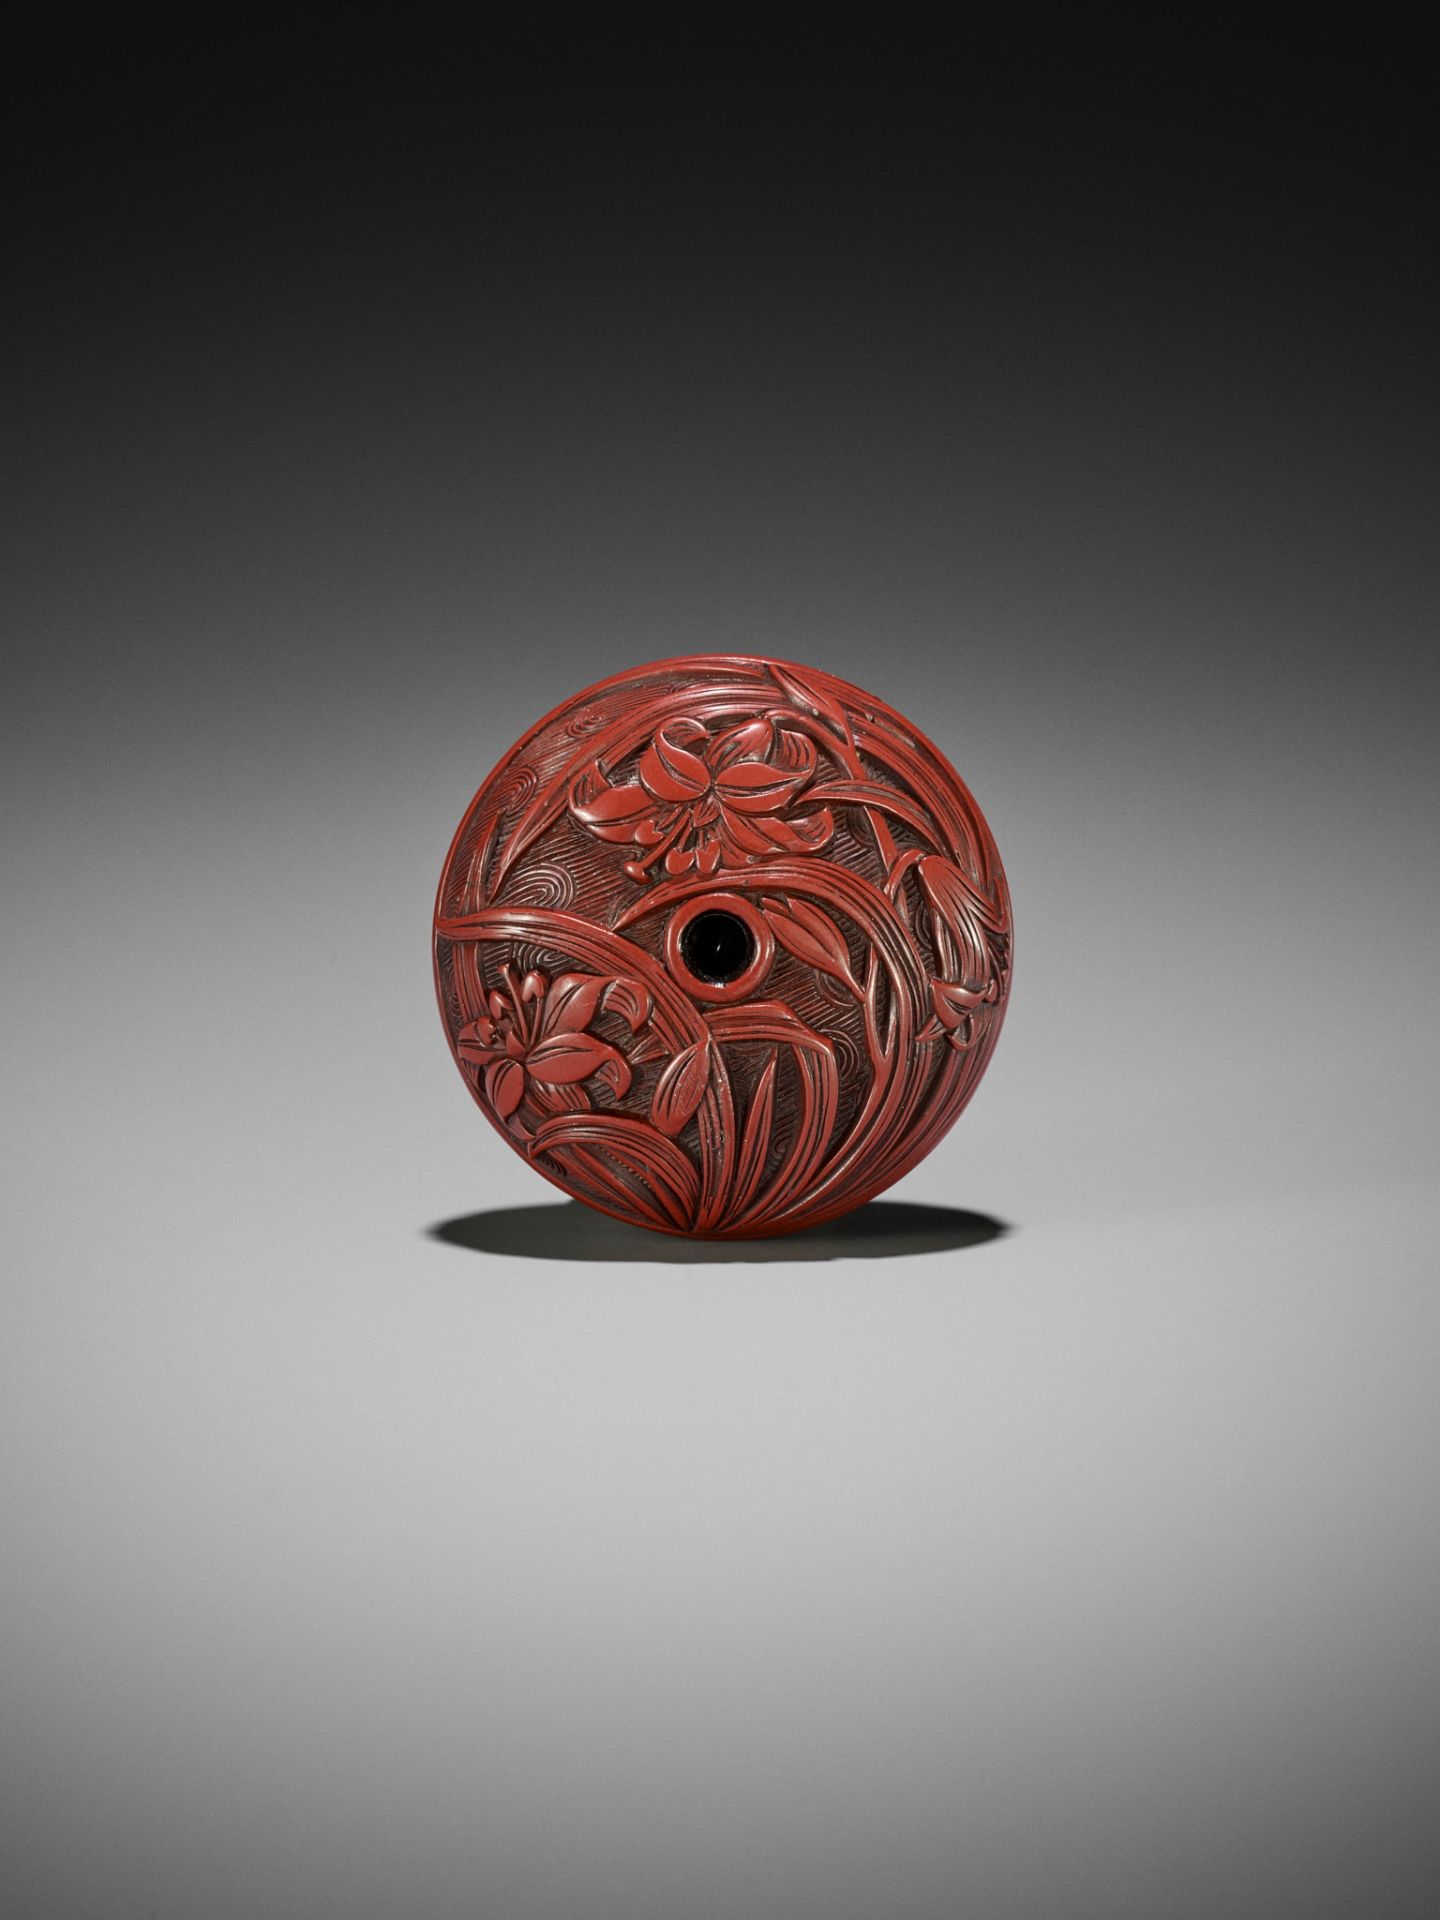 A FINE TSUISHU (CARVED RED LACQUER) MANJU NETSUKE WITH LILIES - Image 2 of 8